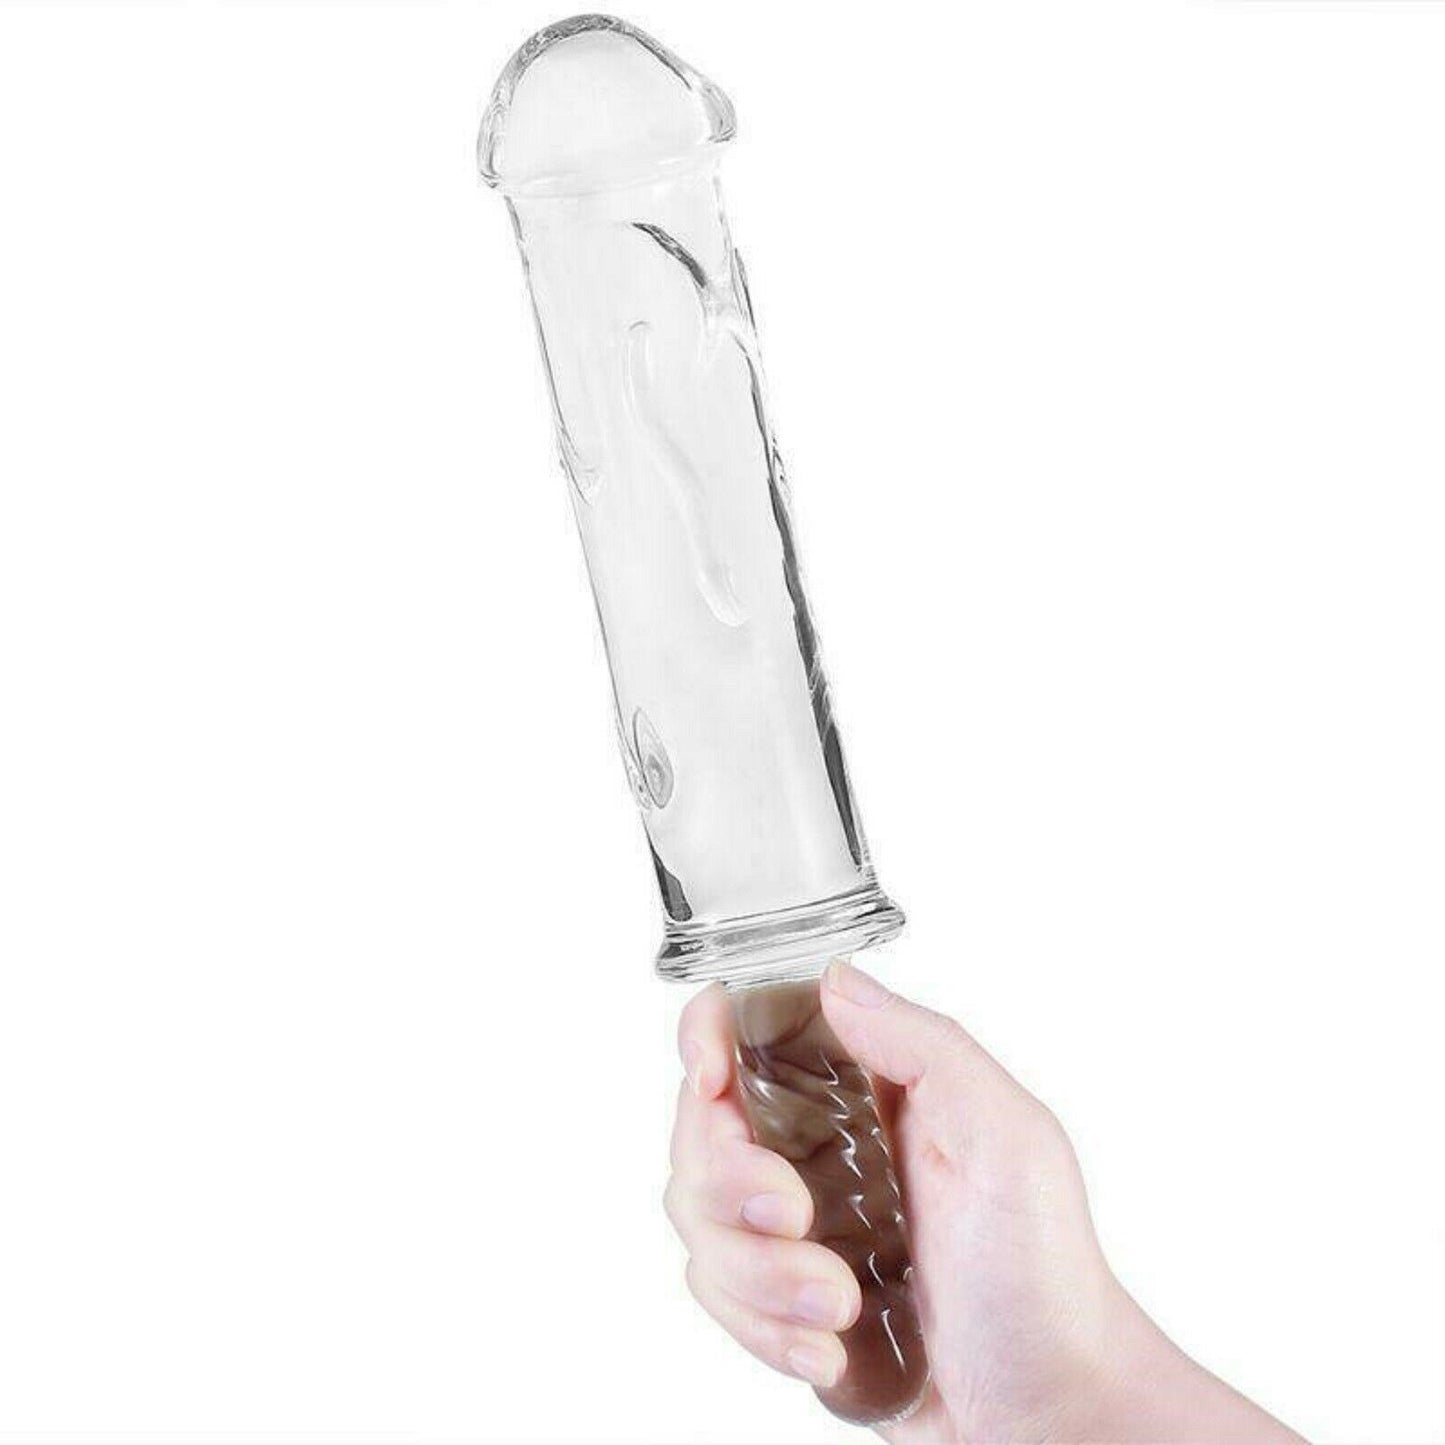 11.2" LARGE Glass Dildo Dong Wand Massager Huge Anal Crystal Thruster XL Sex Toy